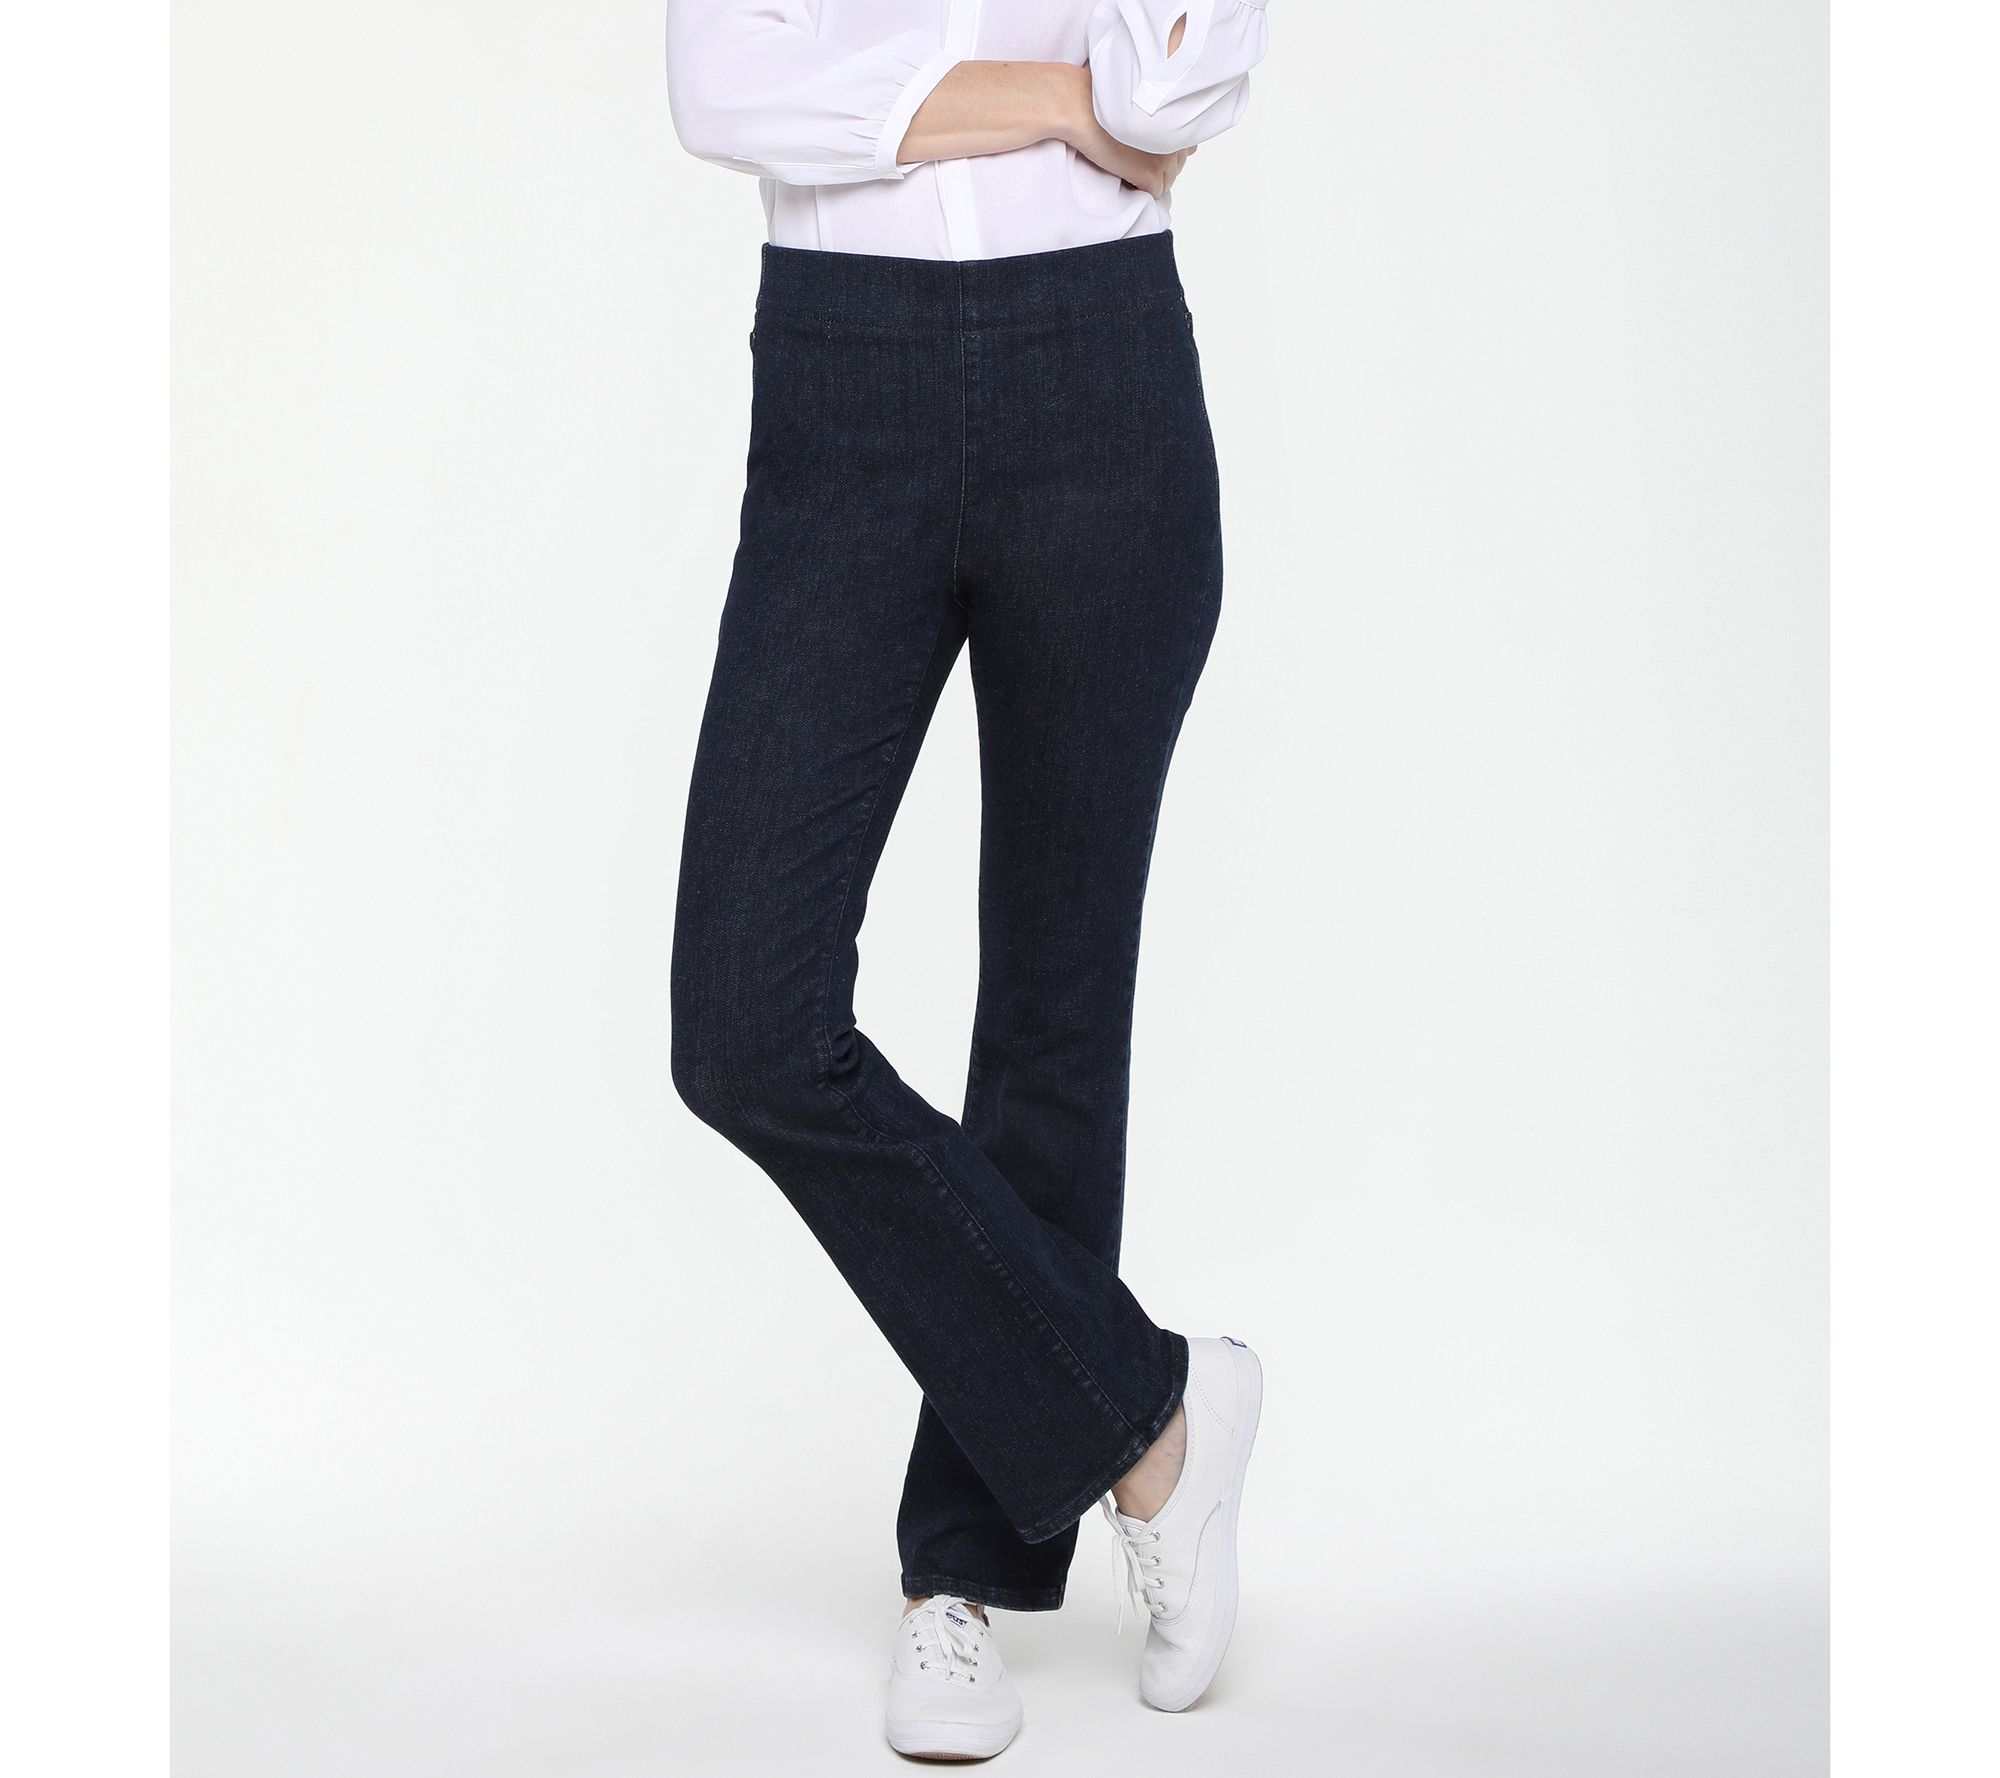 NYDJ Spanspring Pull-On Slim Bootcut Jeans- Langley -